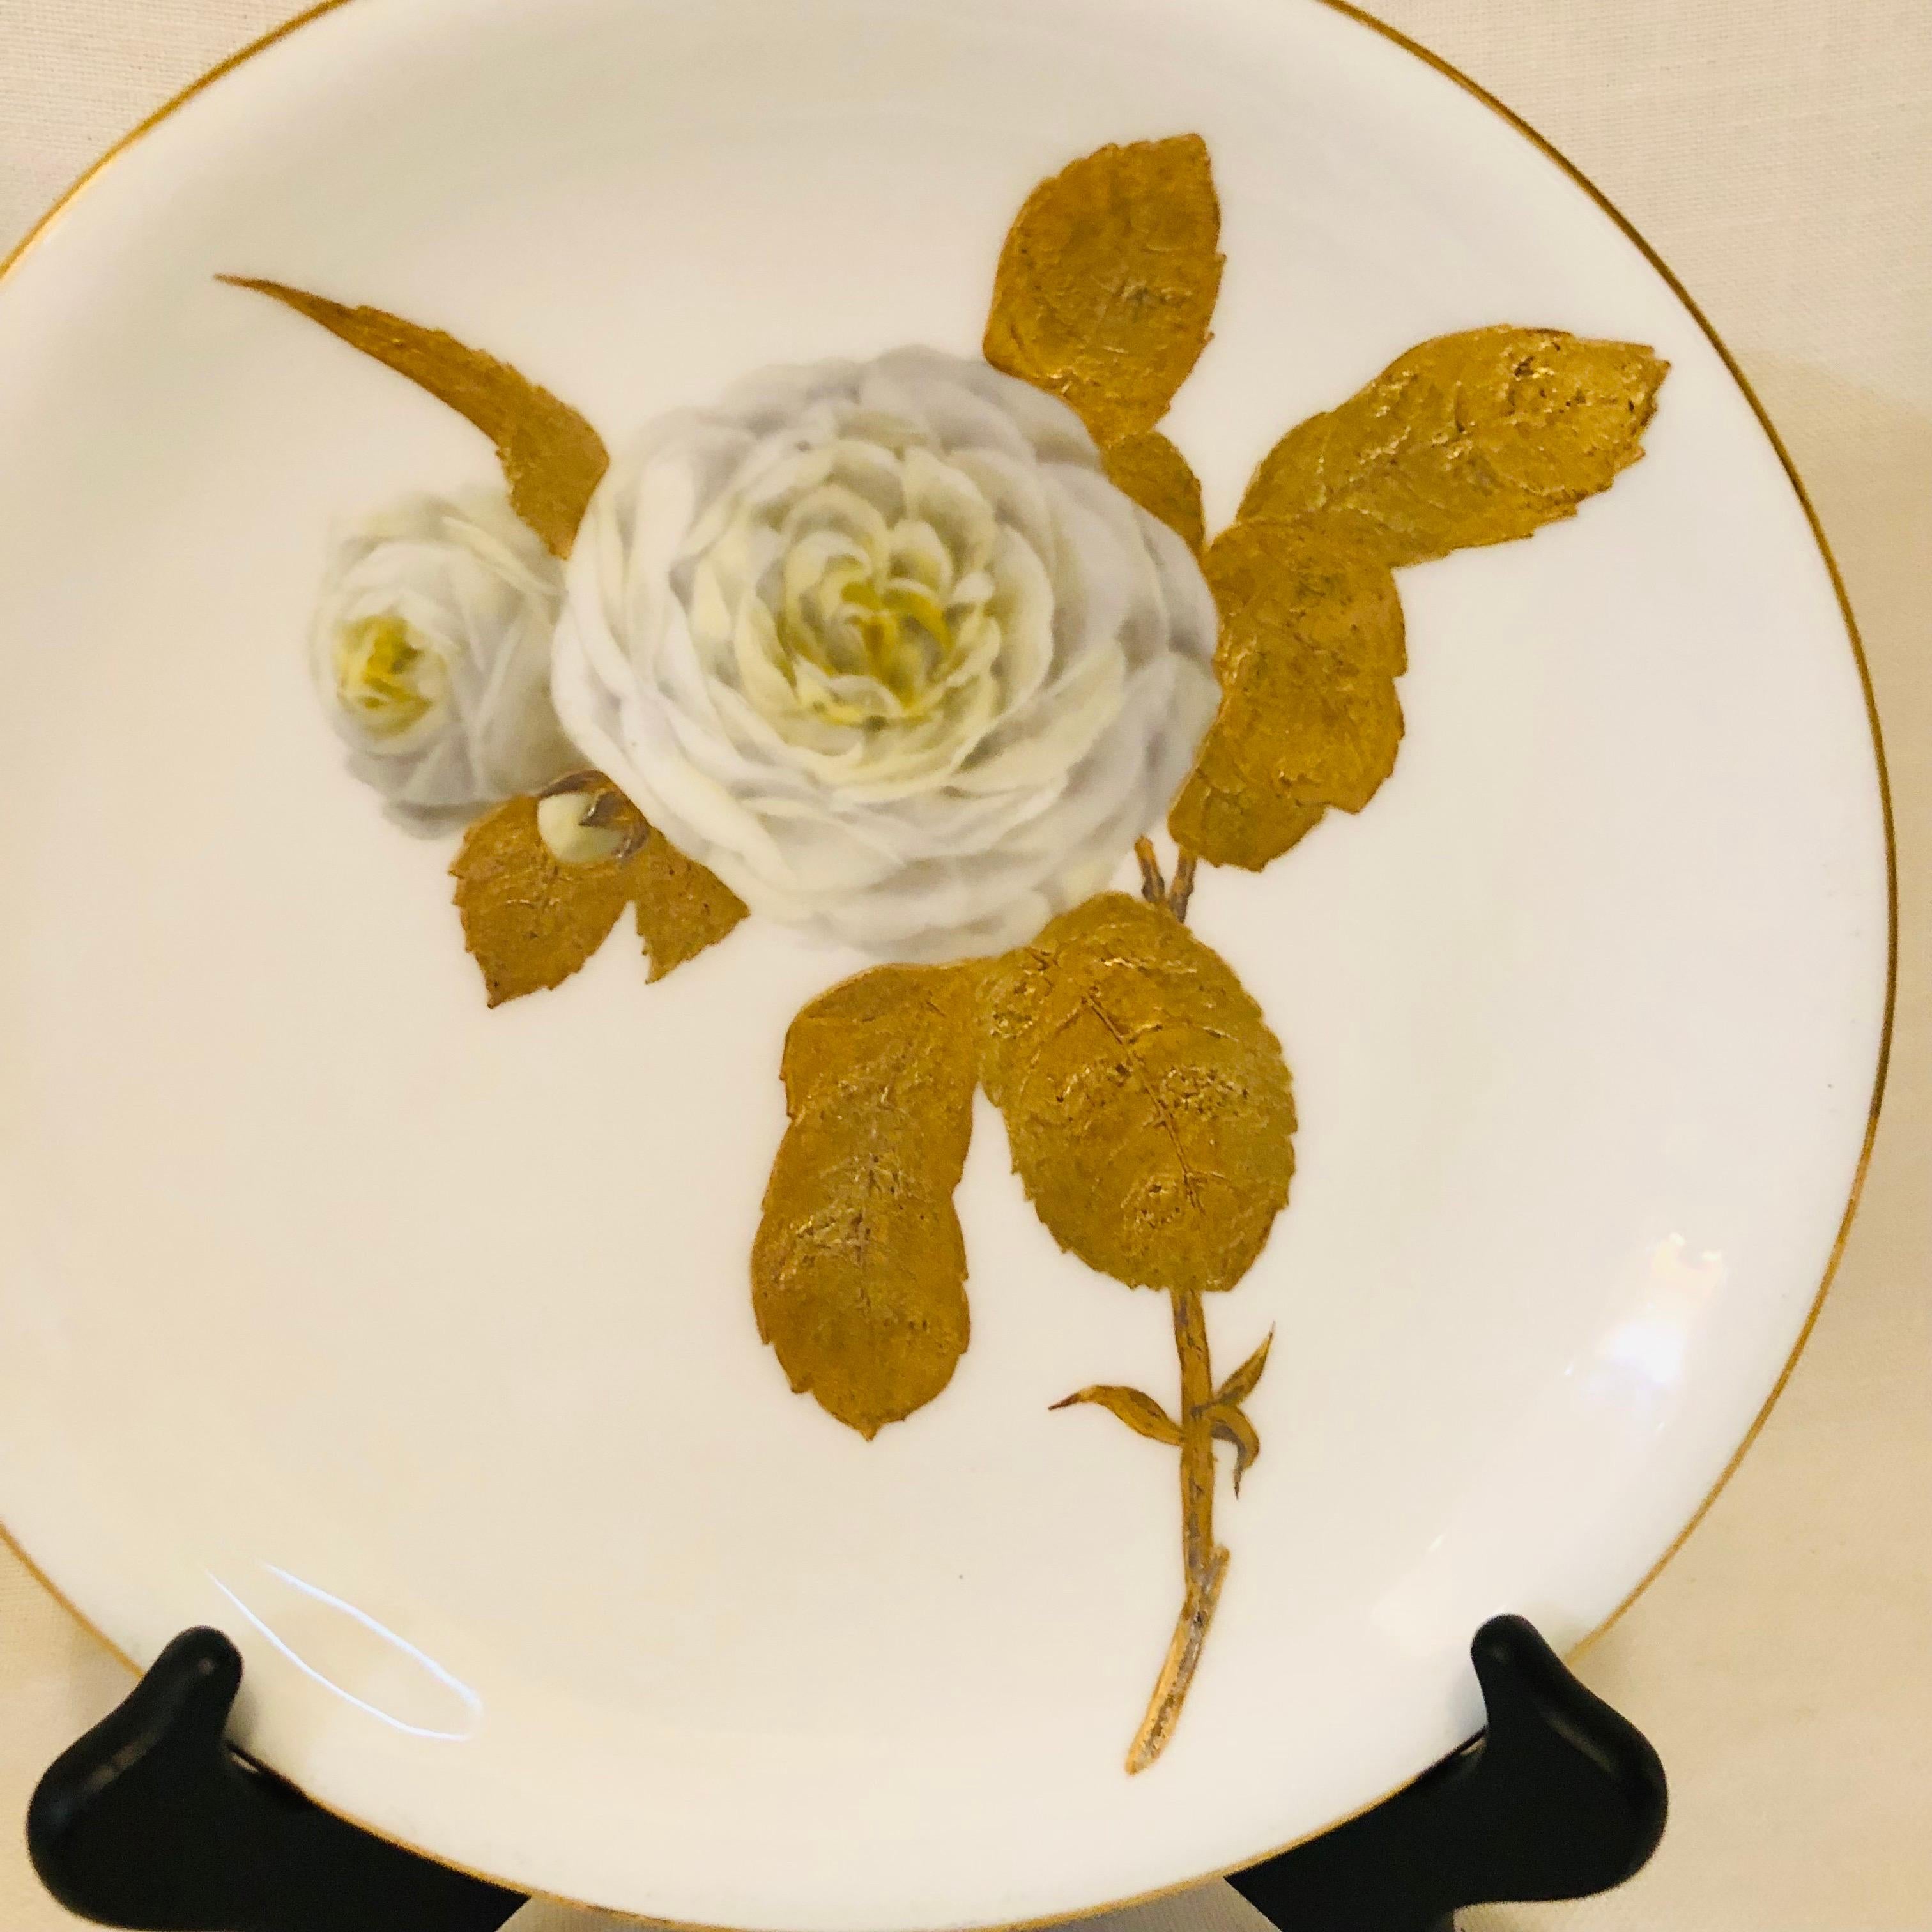 Minton Plates Each Painted With a Different Rose With Gold and Platinum Accents 7